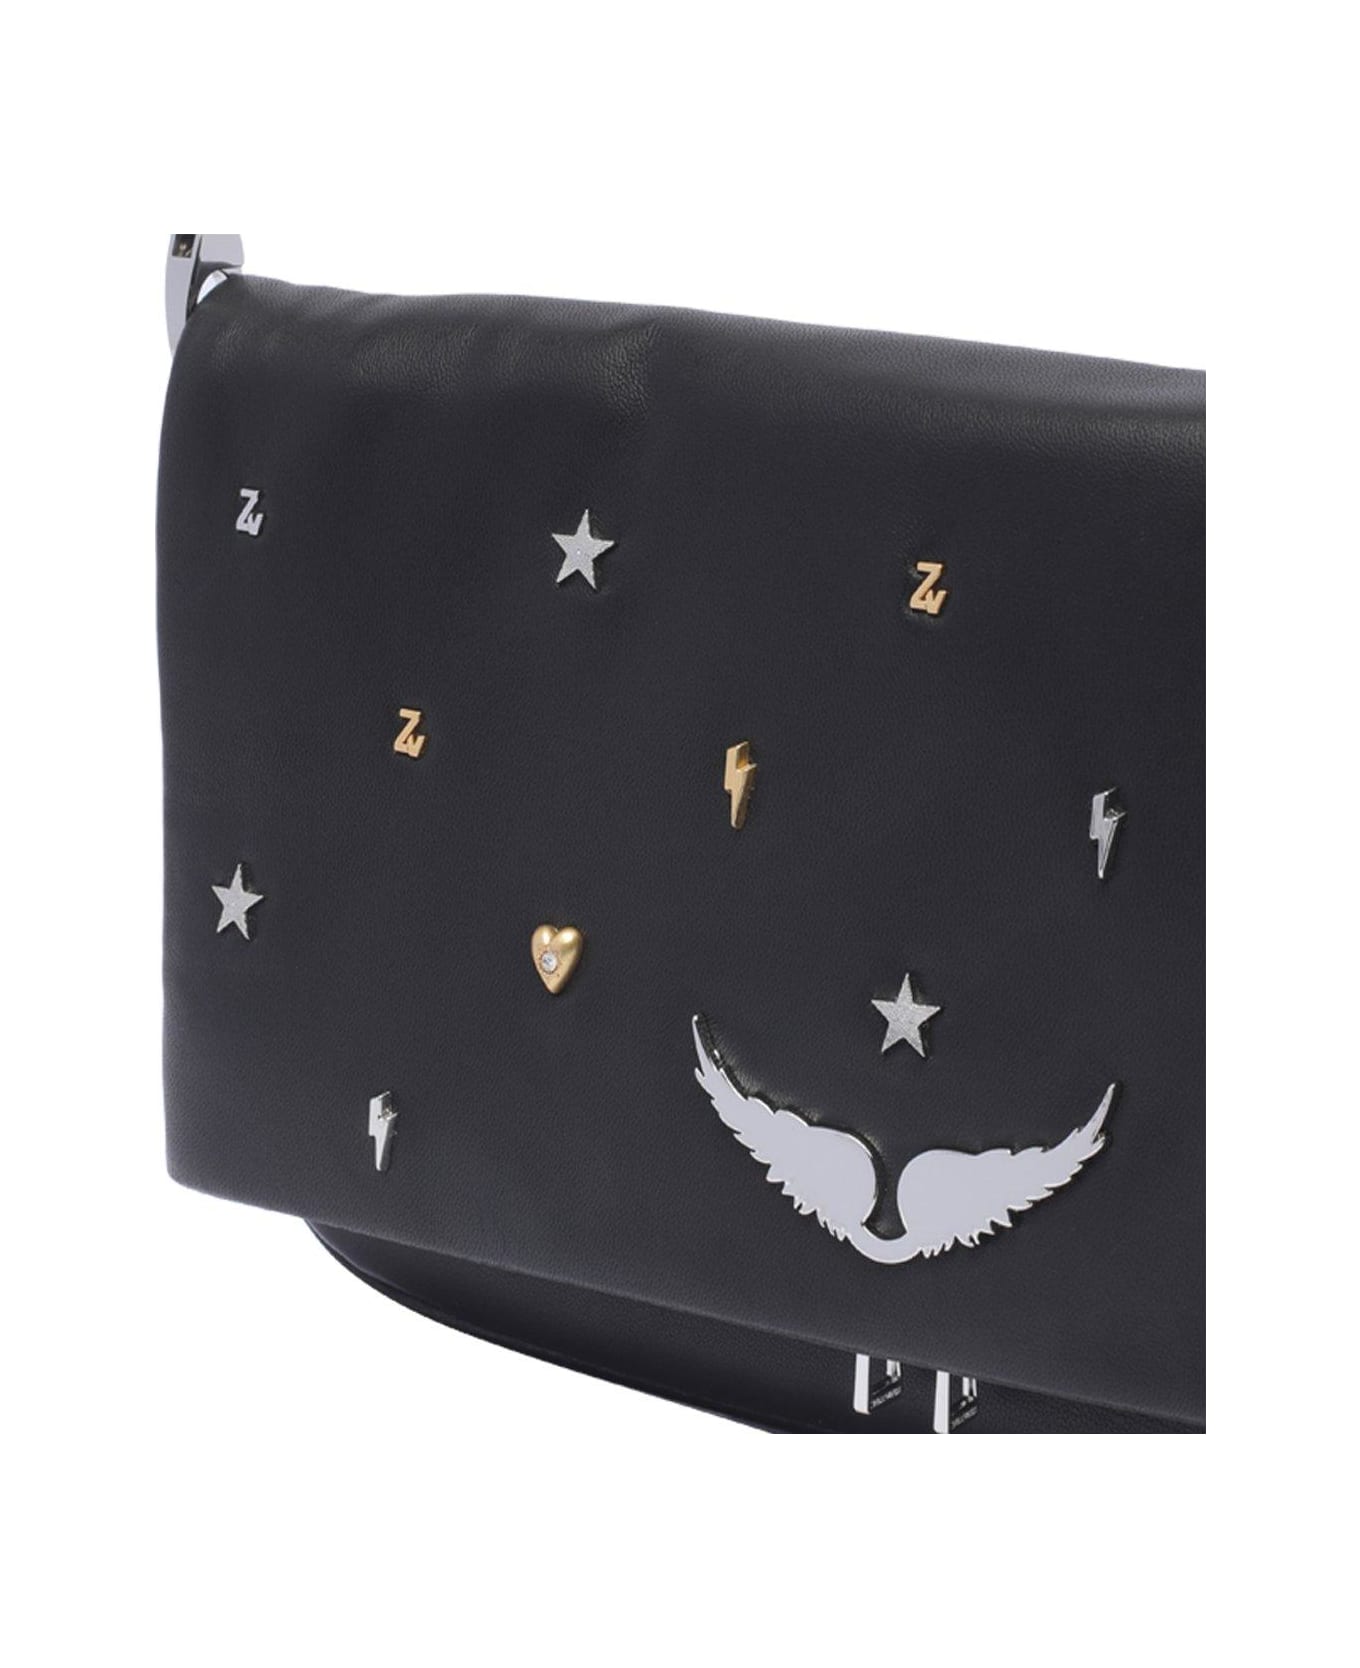 Zadig & Voltaire Rock Lucky Charms Chain-linked Clutch Bag - Noir ショルダーバッグ